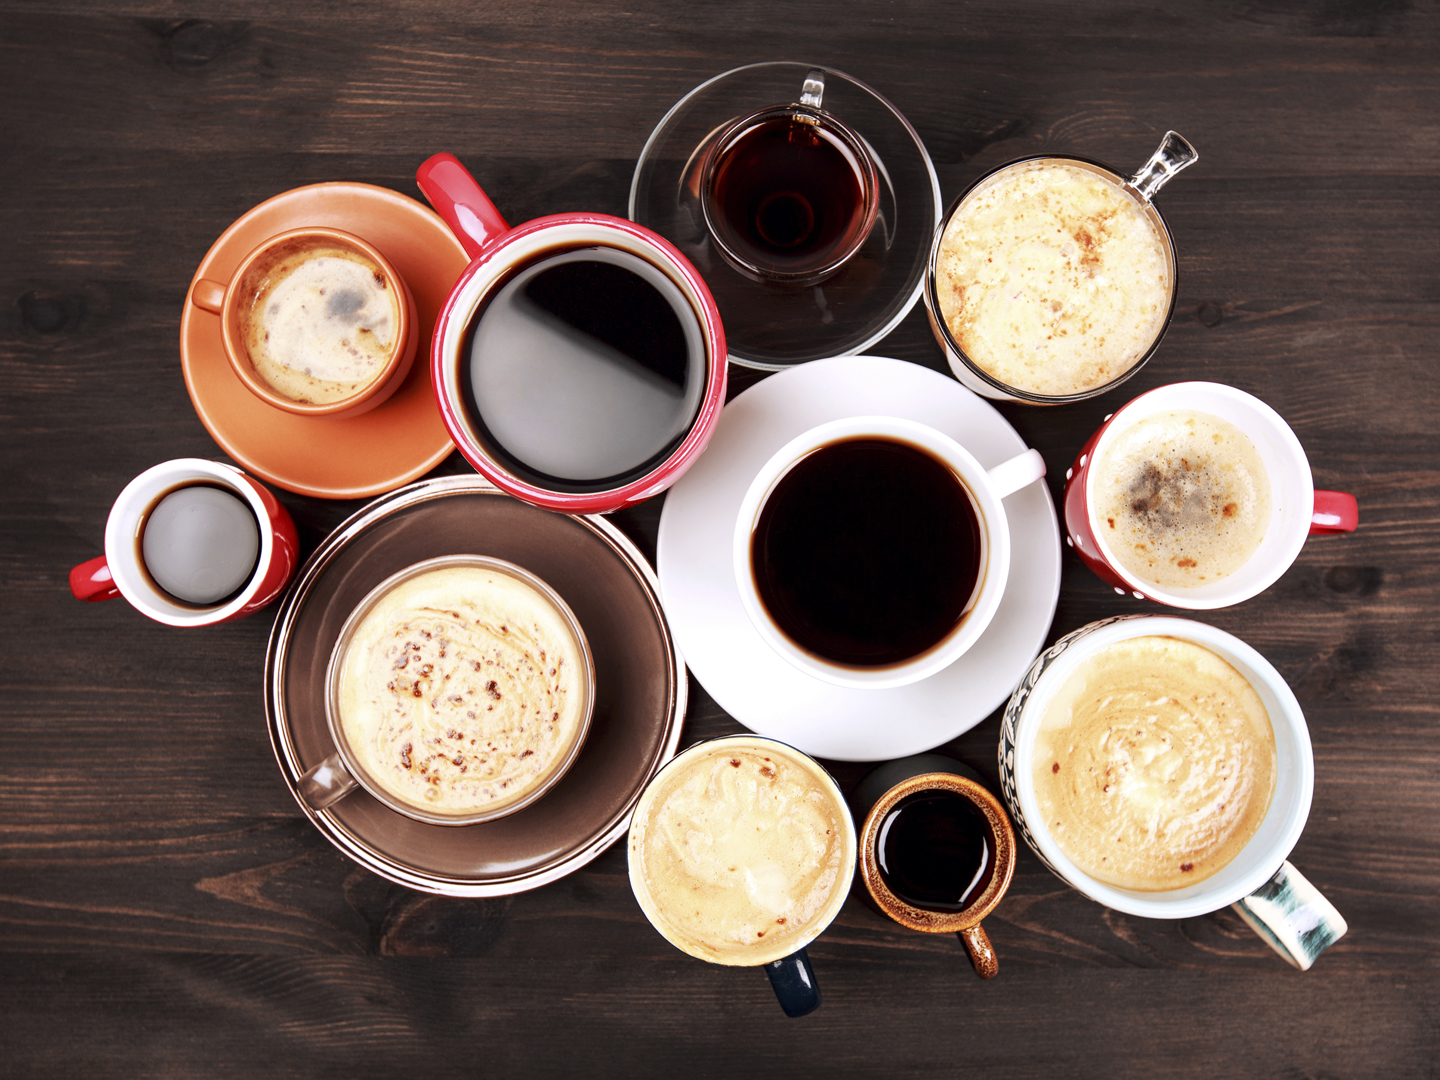 Many different cups of coffee on dark wooden table, top view.